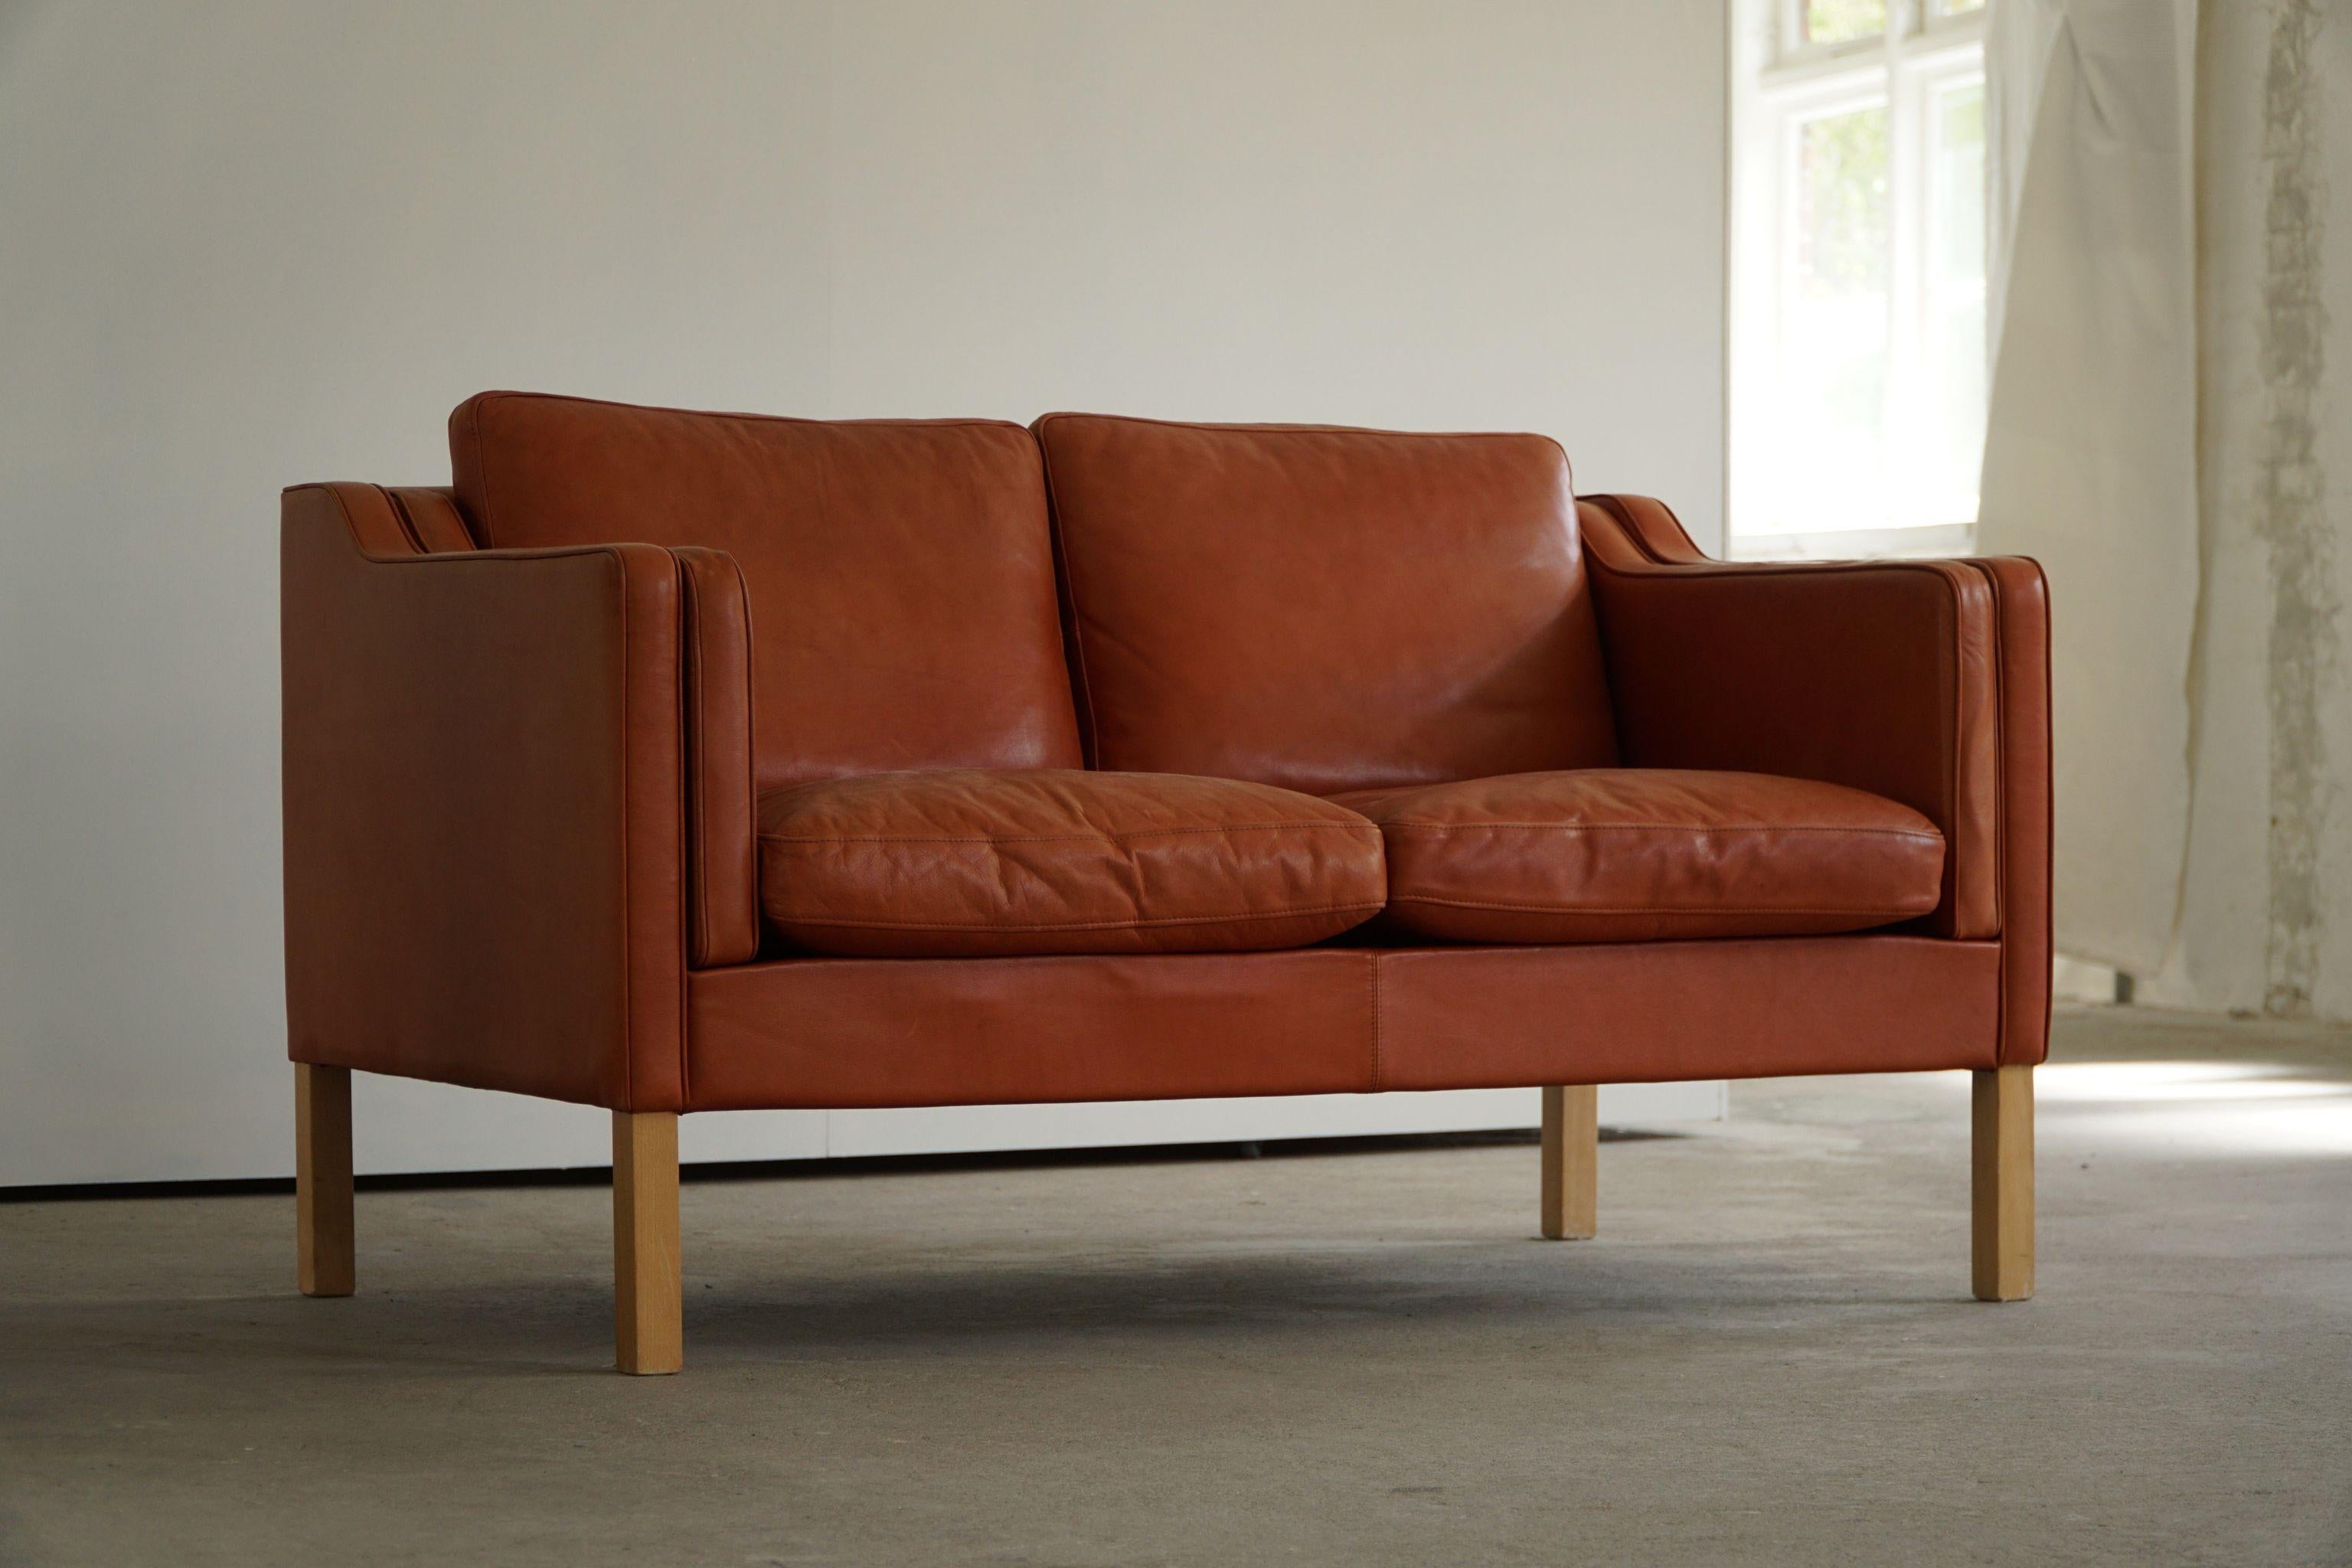 20th Century Classic Danish Mid Century Two Seater Sofa in Cognac Leather, Made in 1970s